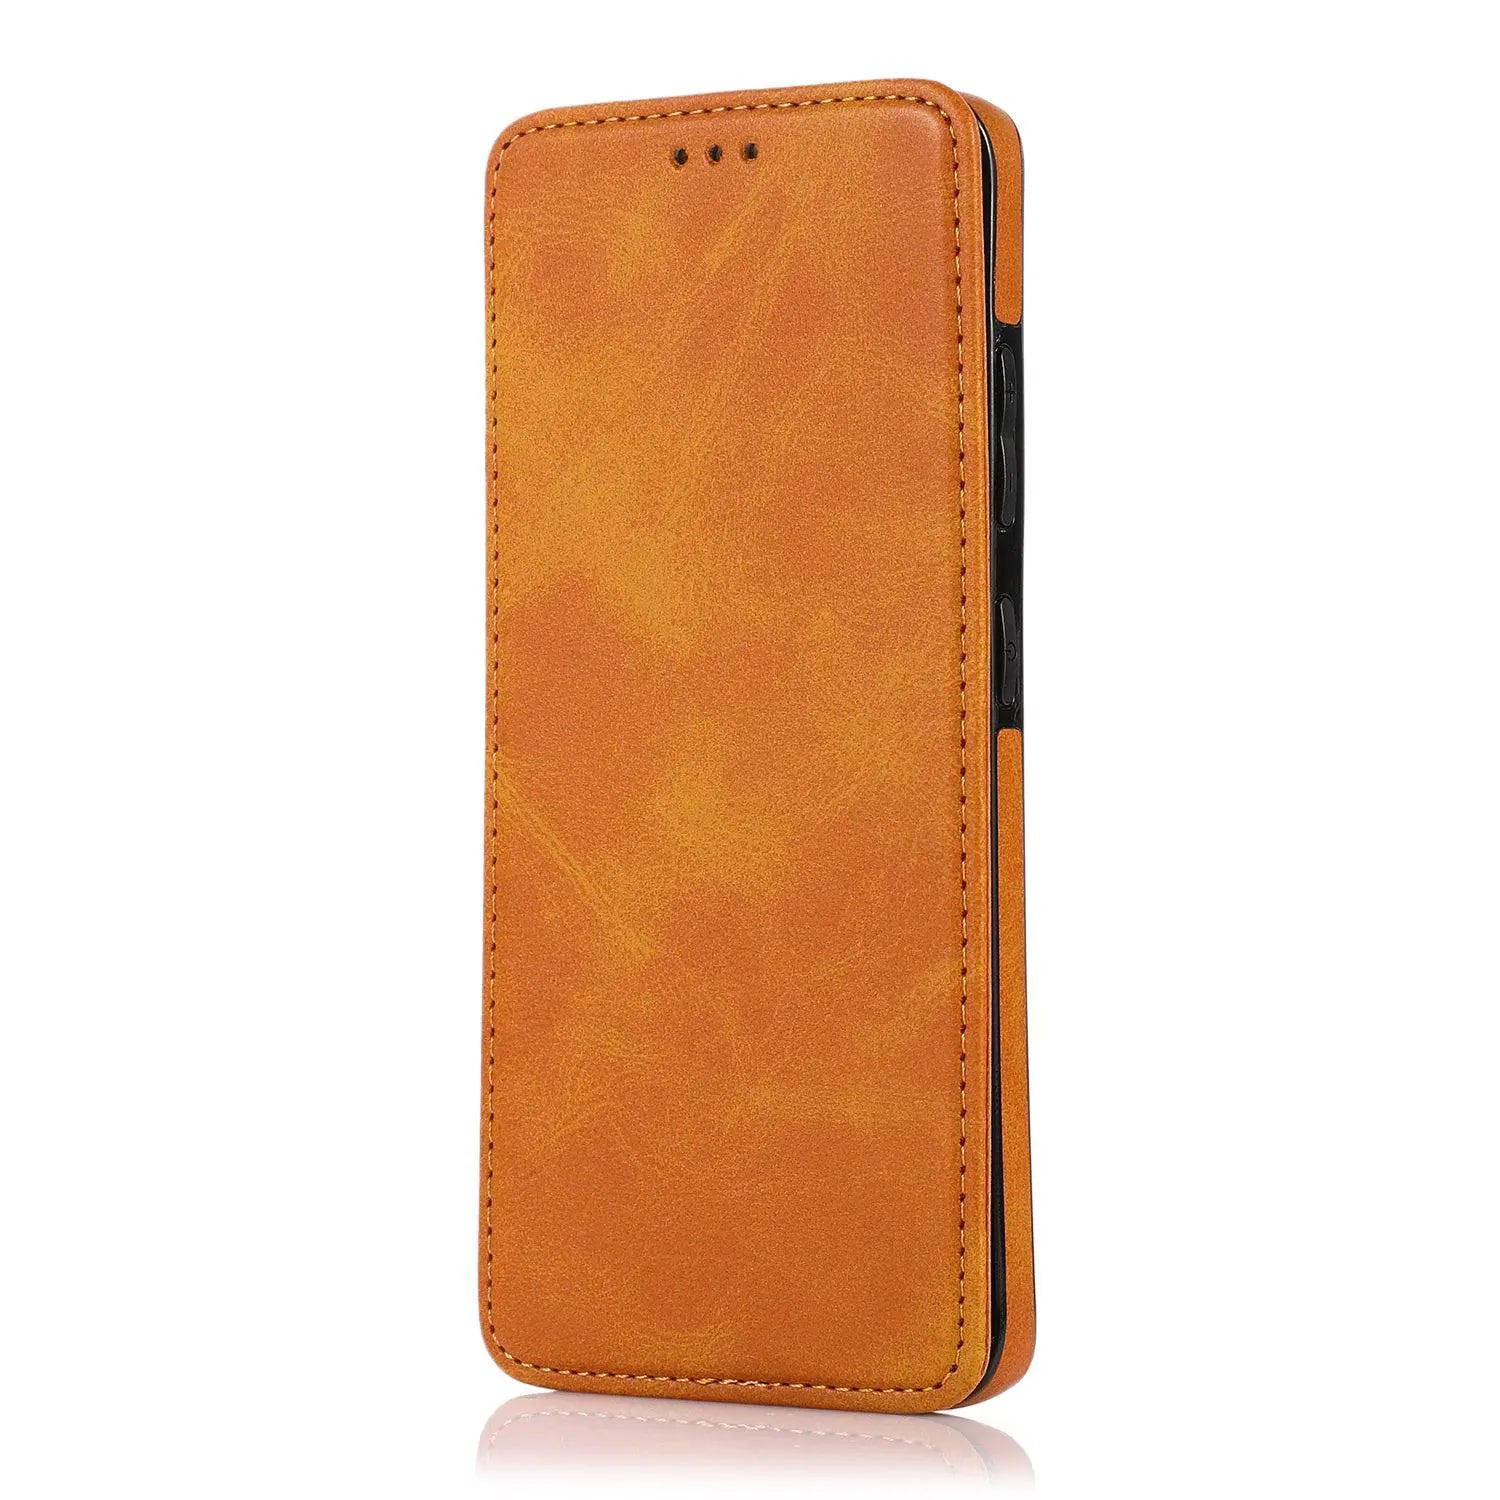 Premium Leather Flip Case For Samsung Galaxy S21 S20 Ultra Plus Note Note 20 Ultra - Pinnacle Luxuries